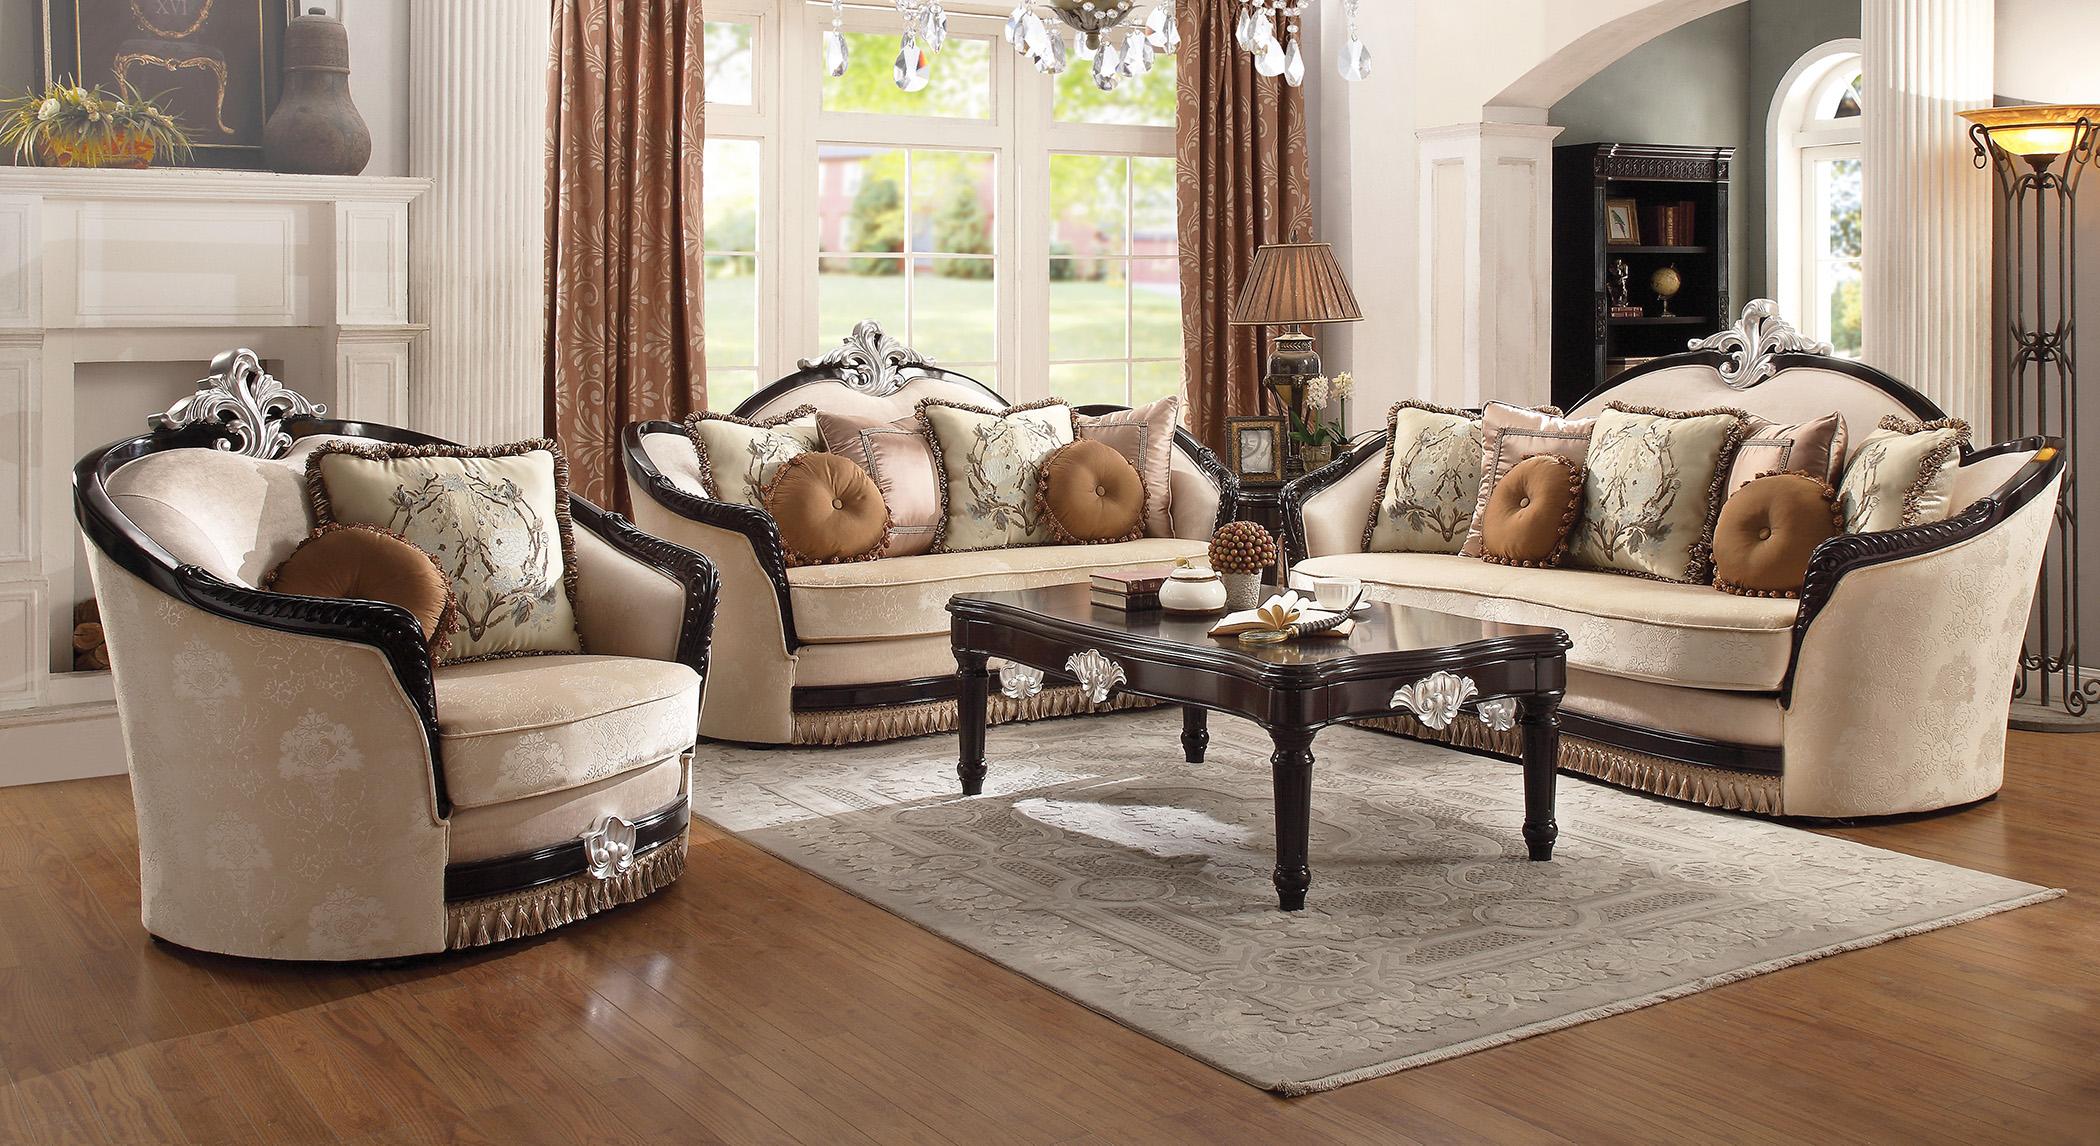 Traditional,  Vintage Sofa Loveseat and Chair Set Ernestine-52110 Ernestine-52110-Set-3 in Brown, Beige Fabric